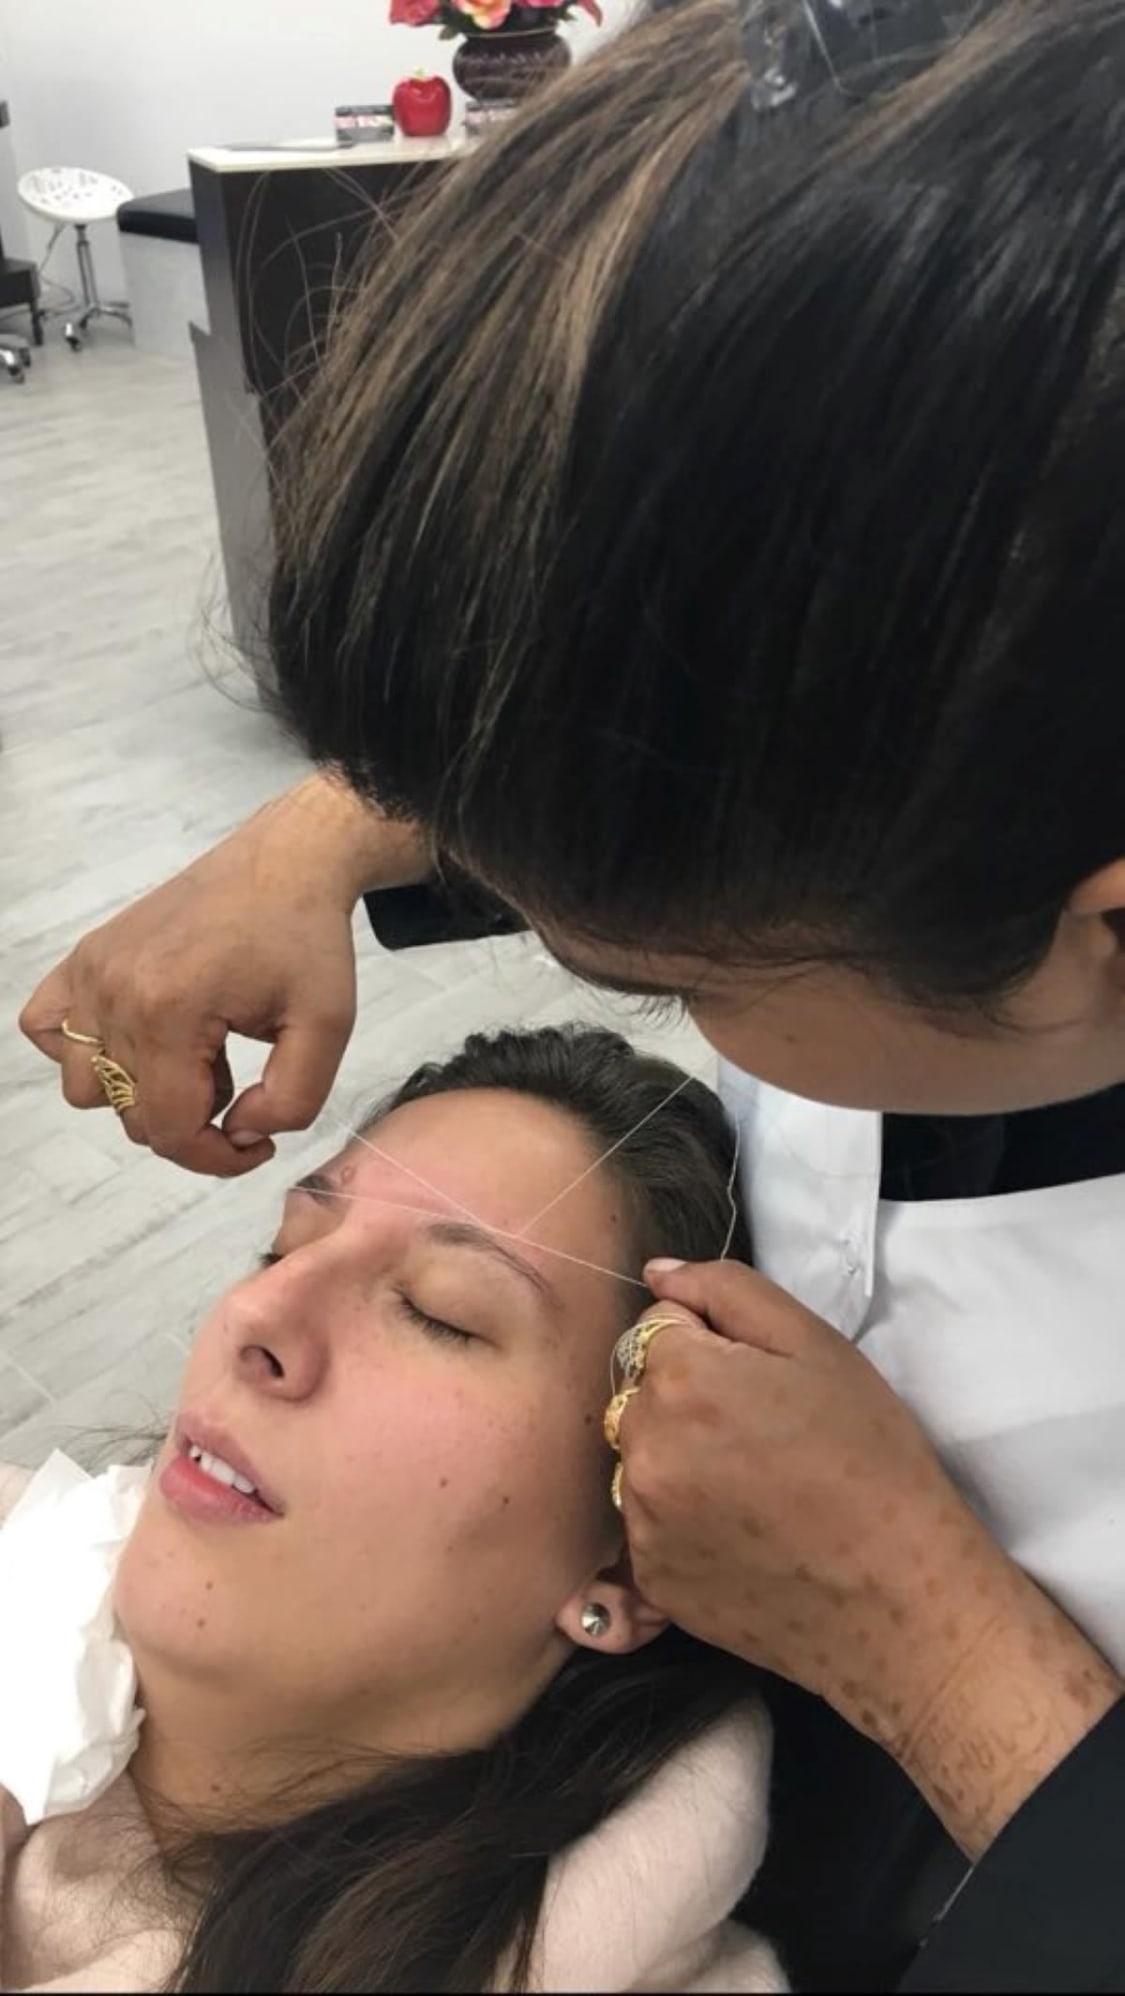 Looks Threading Beauty Salon - 57th Avenue: Read Reviews and Book Classes  on ClassPass